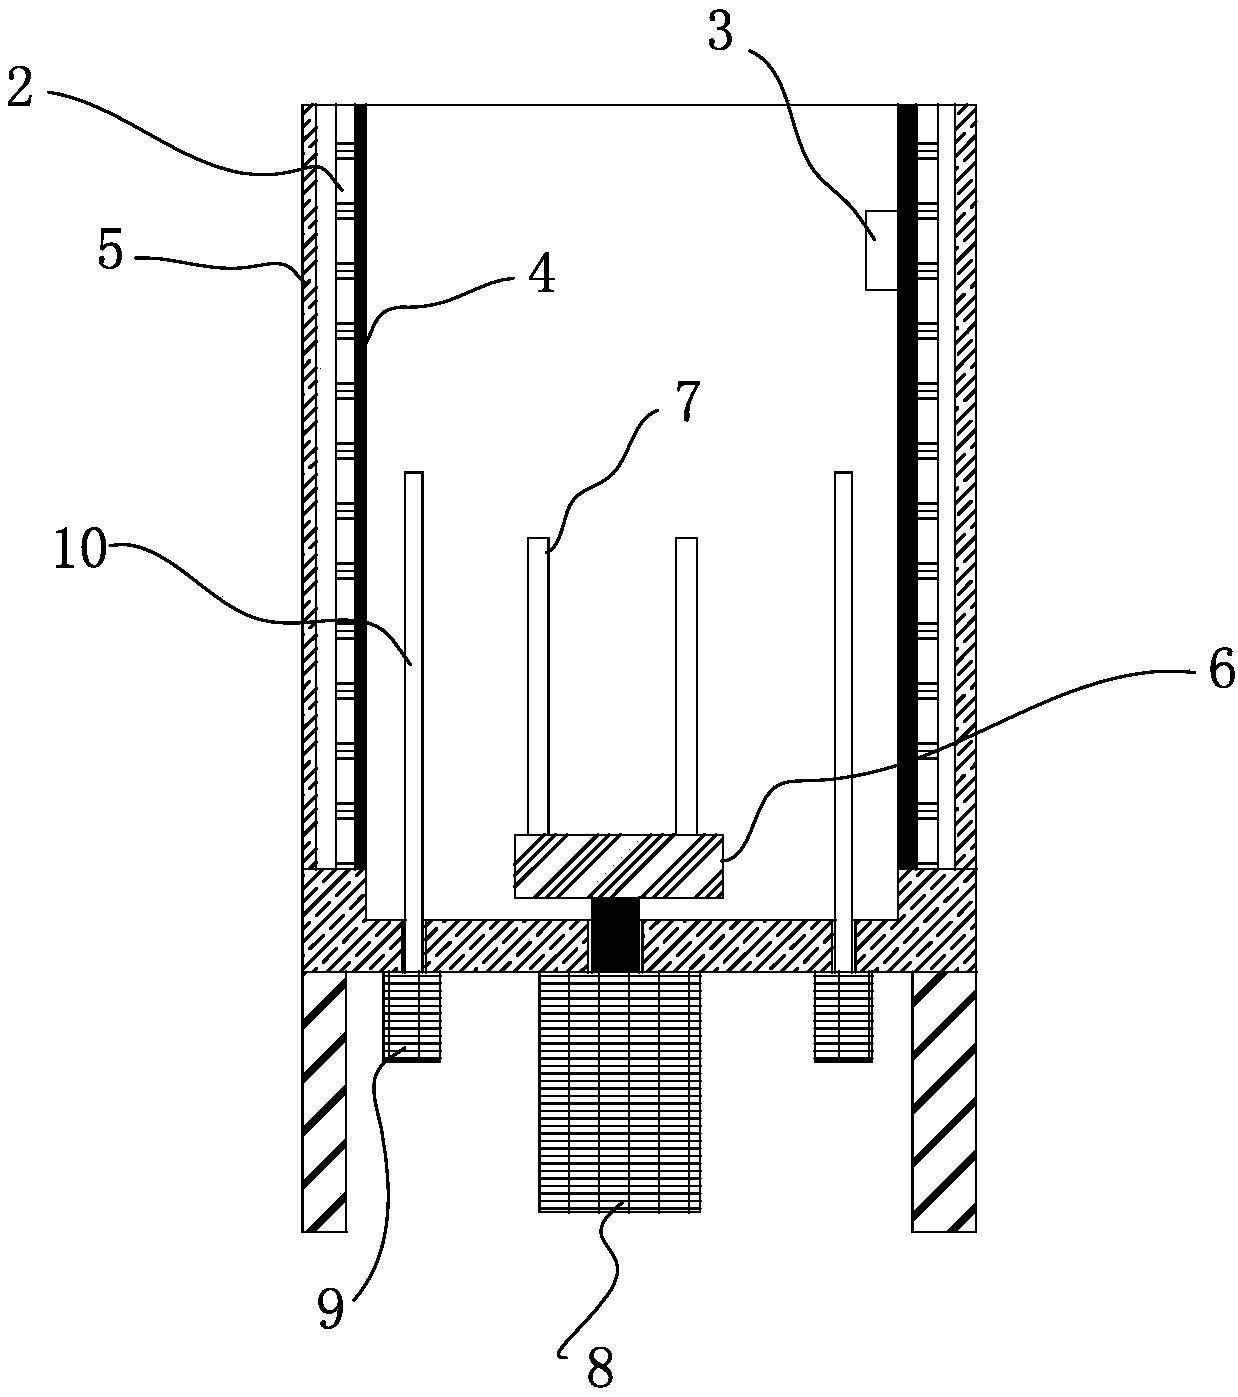 Donkey-hide processing apparatus for producing donkey-hide gelatin